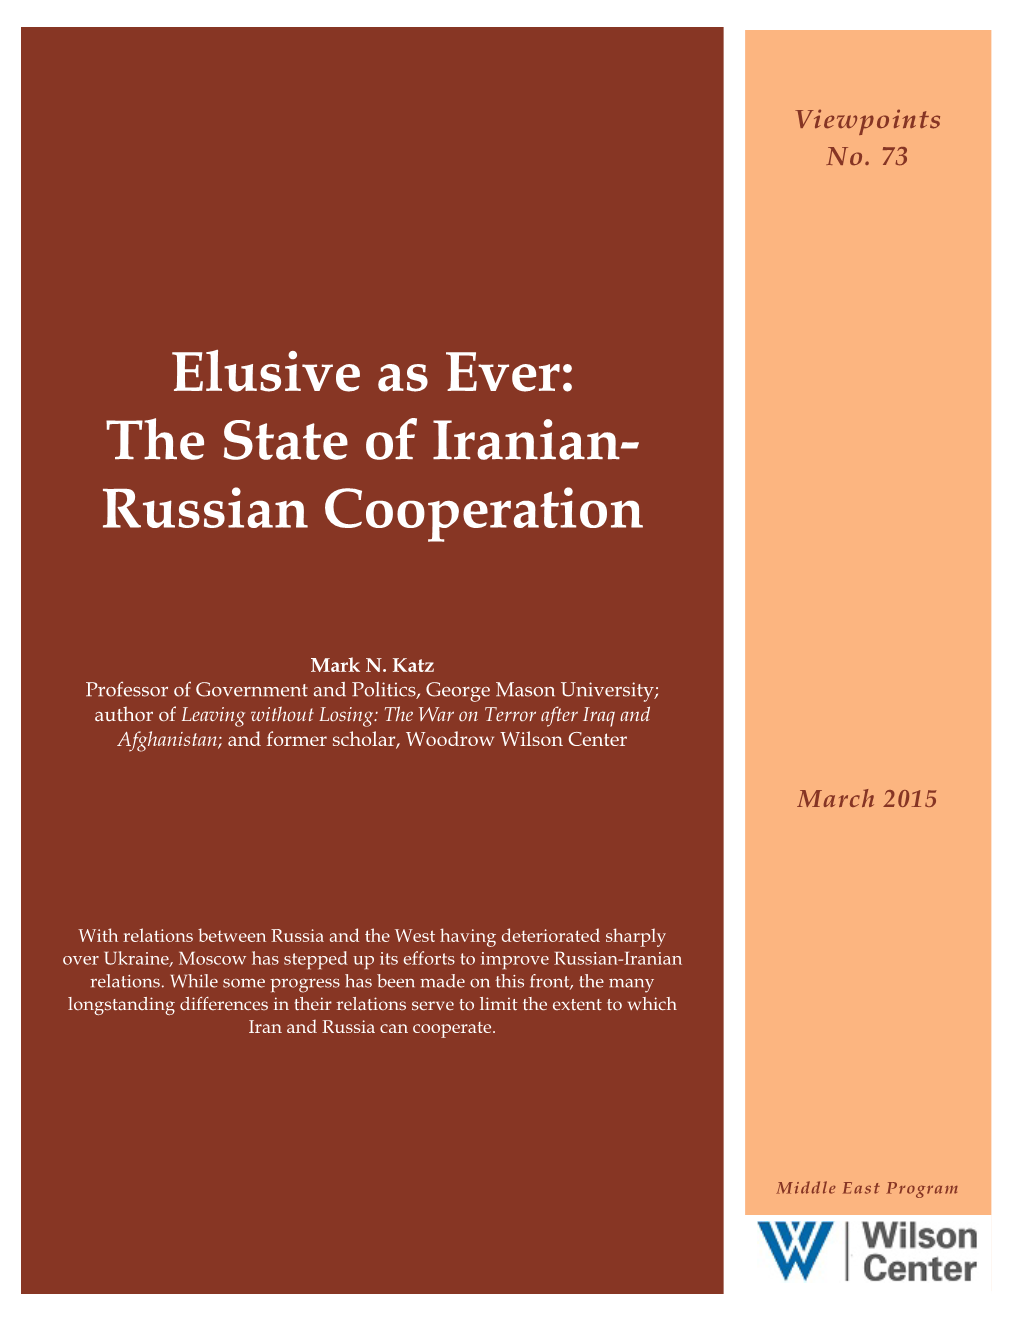 The State of Iranian- Russian Cooperation